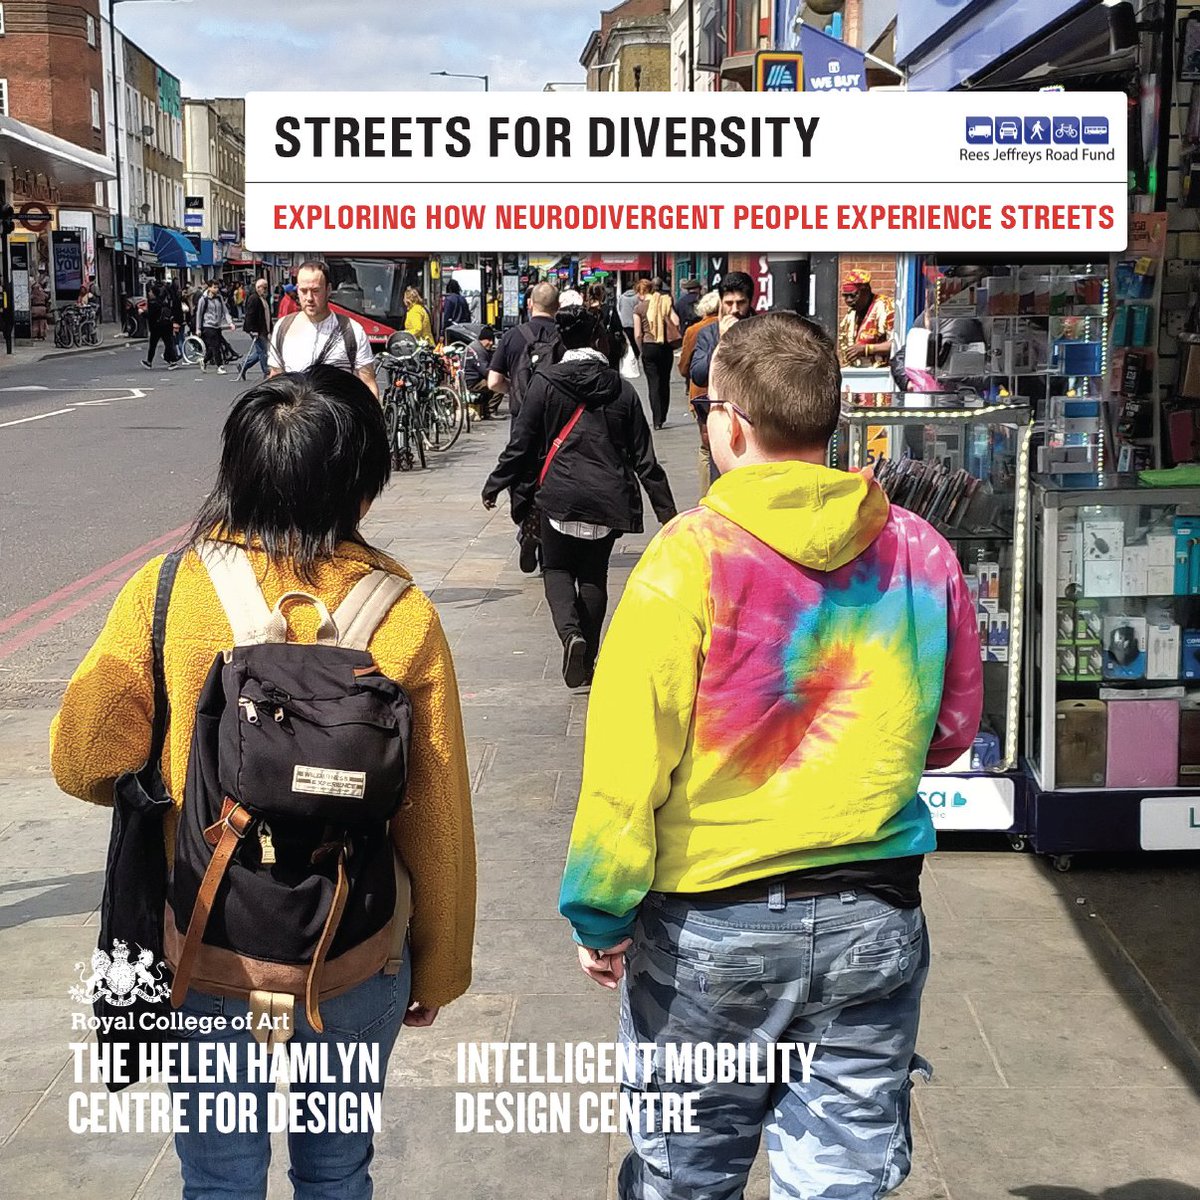 How do #neurodivergentpeople experience streets? What can #design do to improve those experiences? Answers to those questions are in the #Streetsfordiversity report - published today! @HHCDesign rca-media2.rca.ac.uk/documents/Stre…